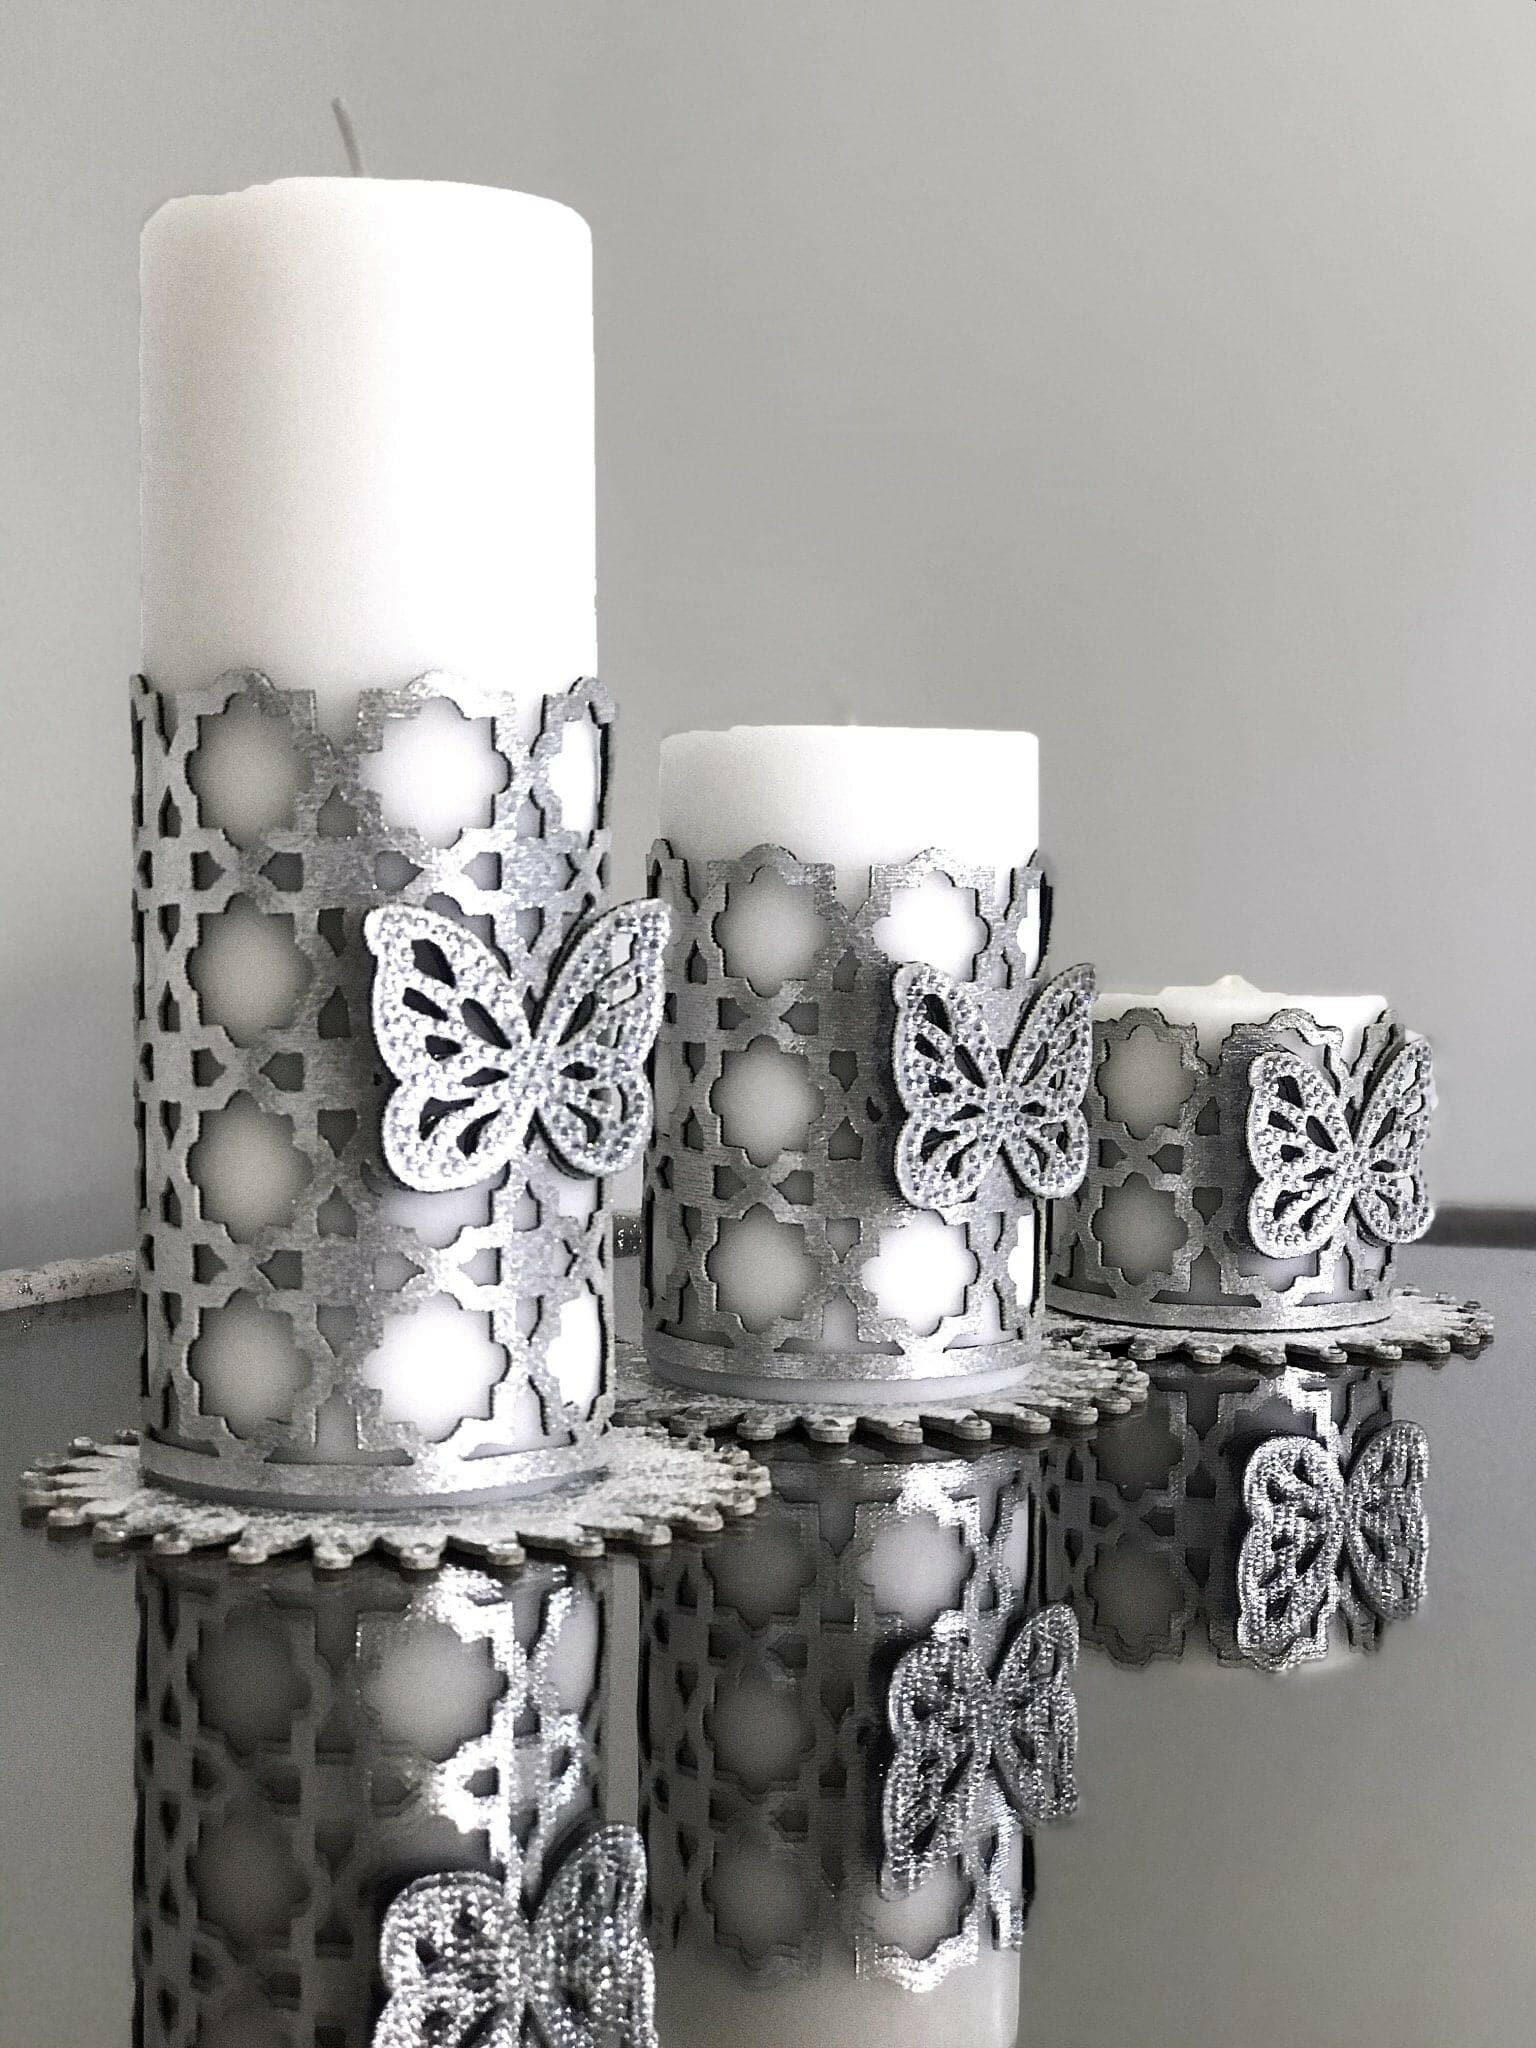 Kelebek Silver Grey Candle Set of 3, Leather Butterfly Pattern, Decorative Creative Home Designs Candles